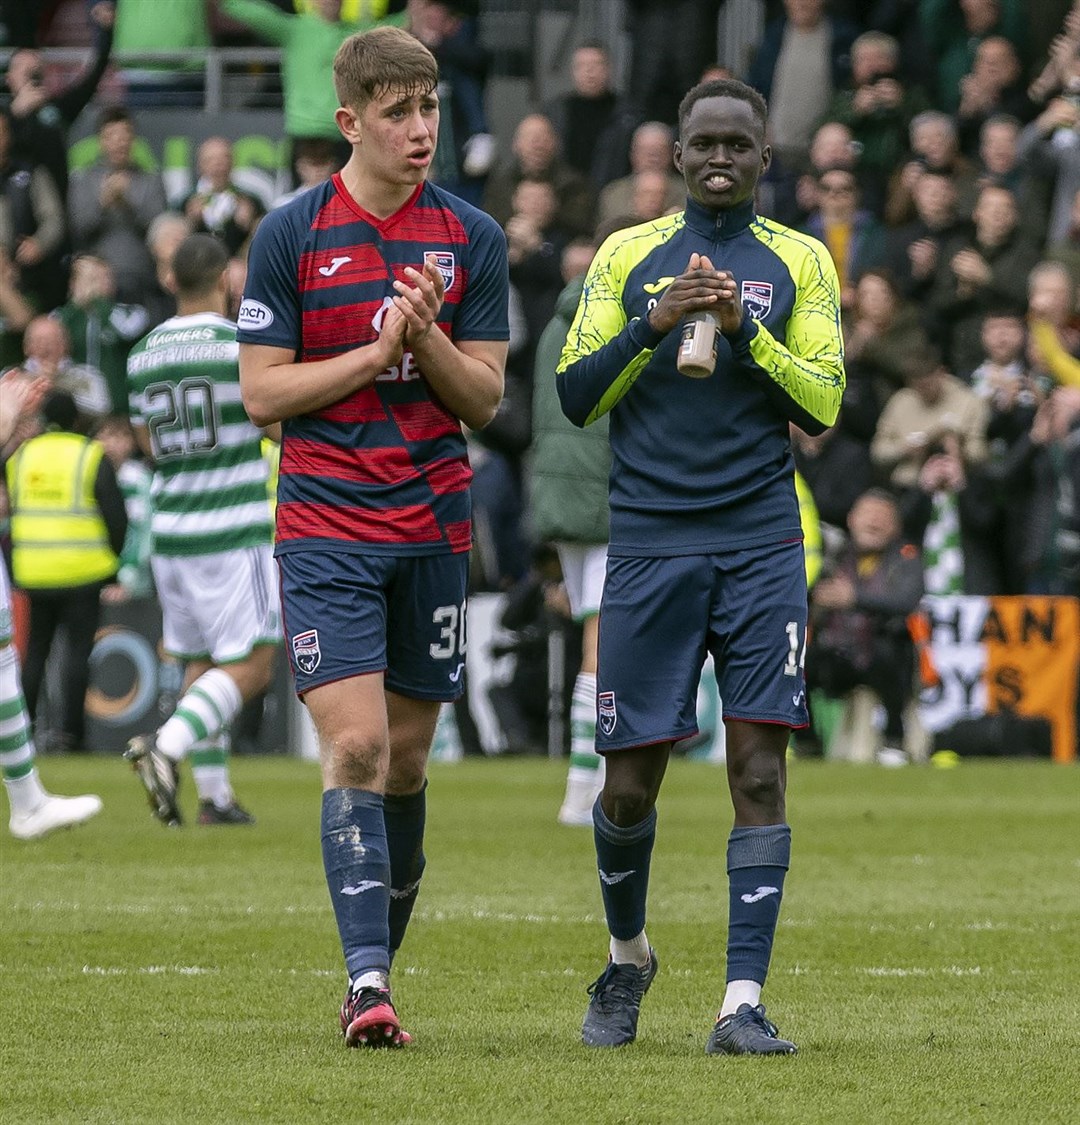 Picture - Ken Macpherson. Ross County(0) v Celtic(2). 02/04/23. Ross County's Dylan Smith and Victor Loturi applaud fans at the end.